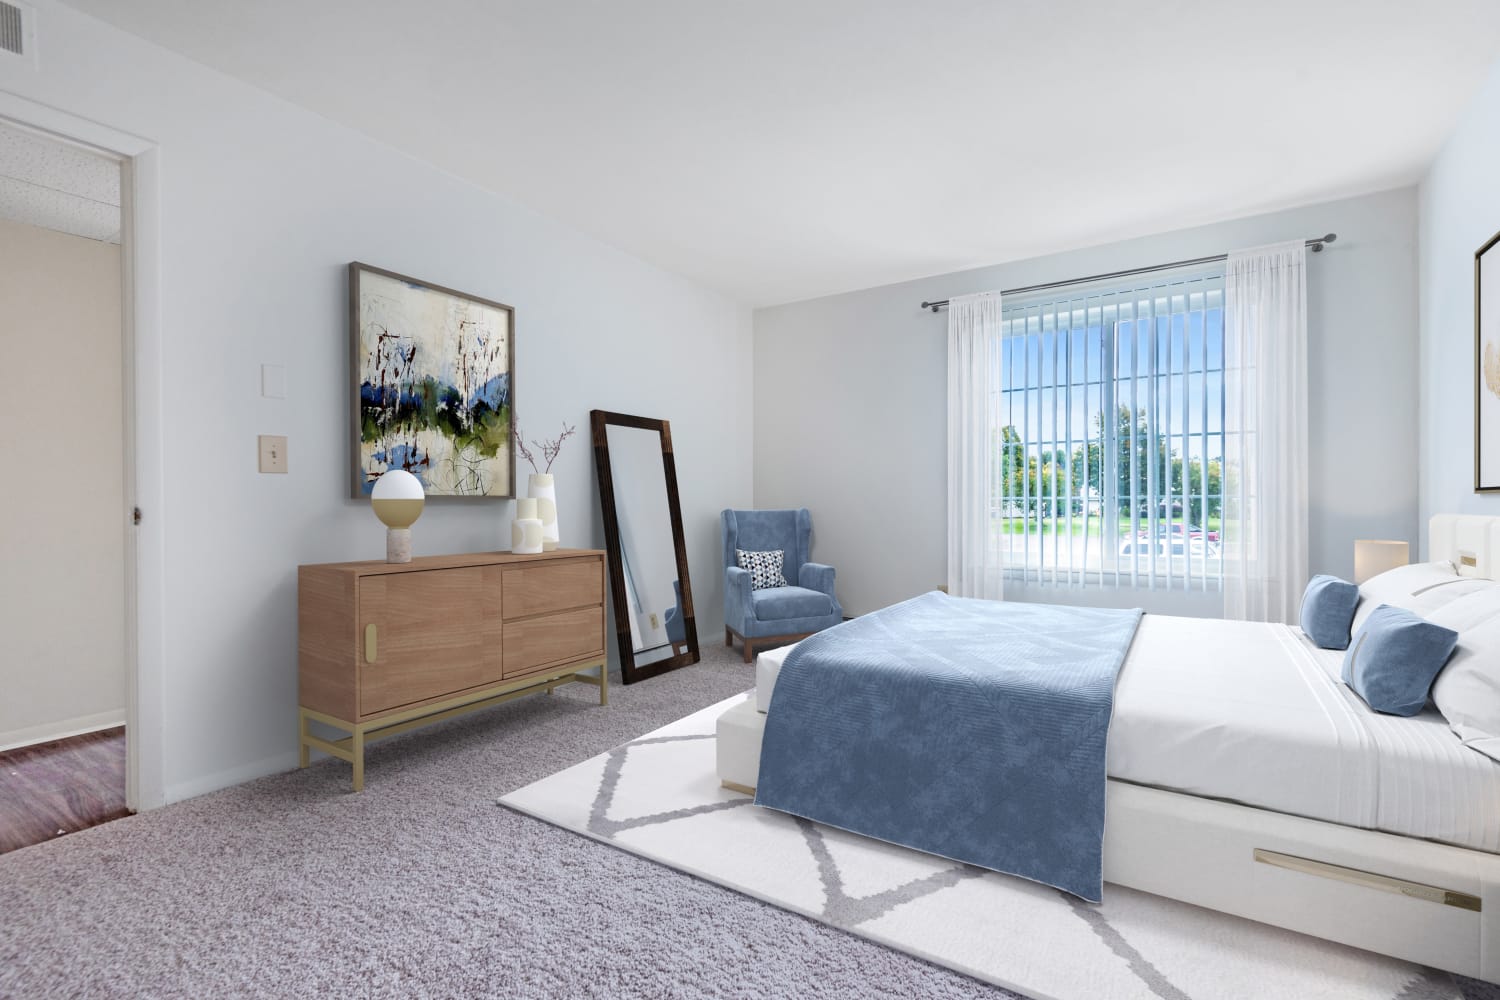 Modern, bright bedroom at Steeplechase Apartments in Camillus, New York.